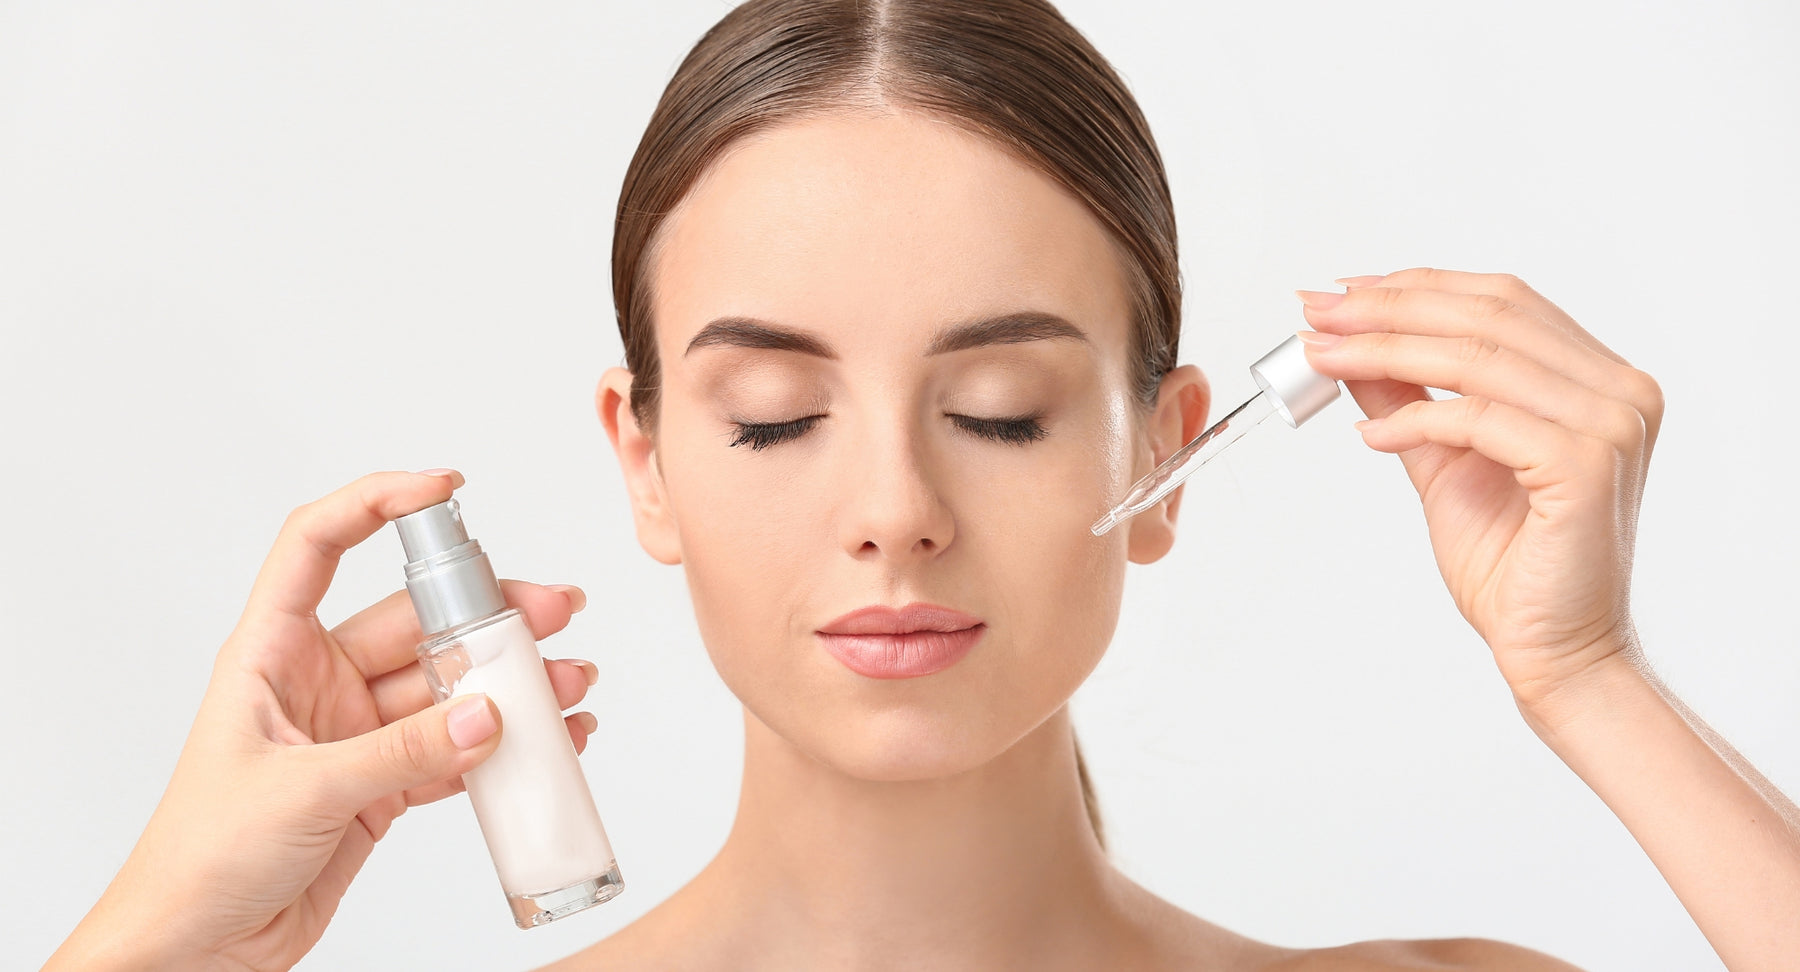 Toner vs. Essence vs. Serums – When and How Do You Use Them?